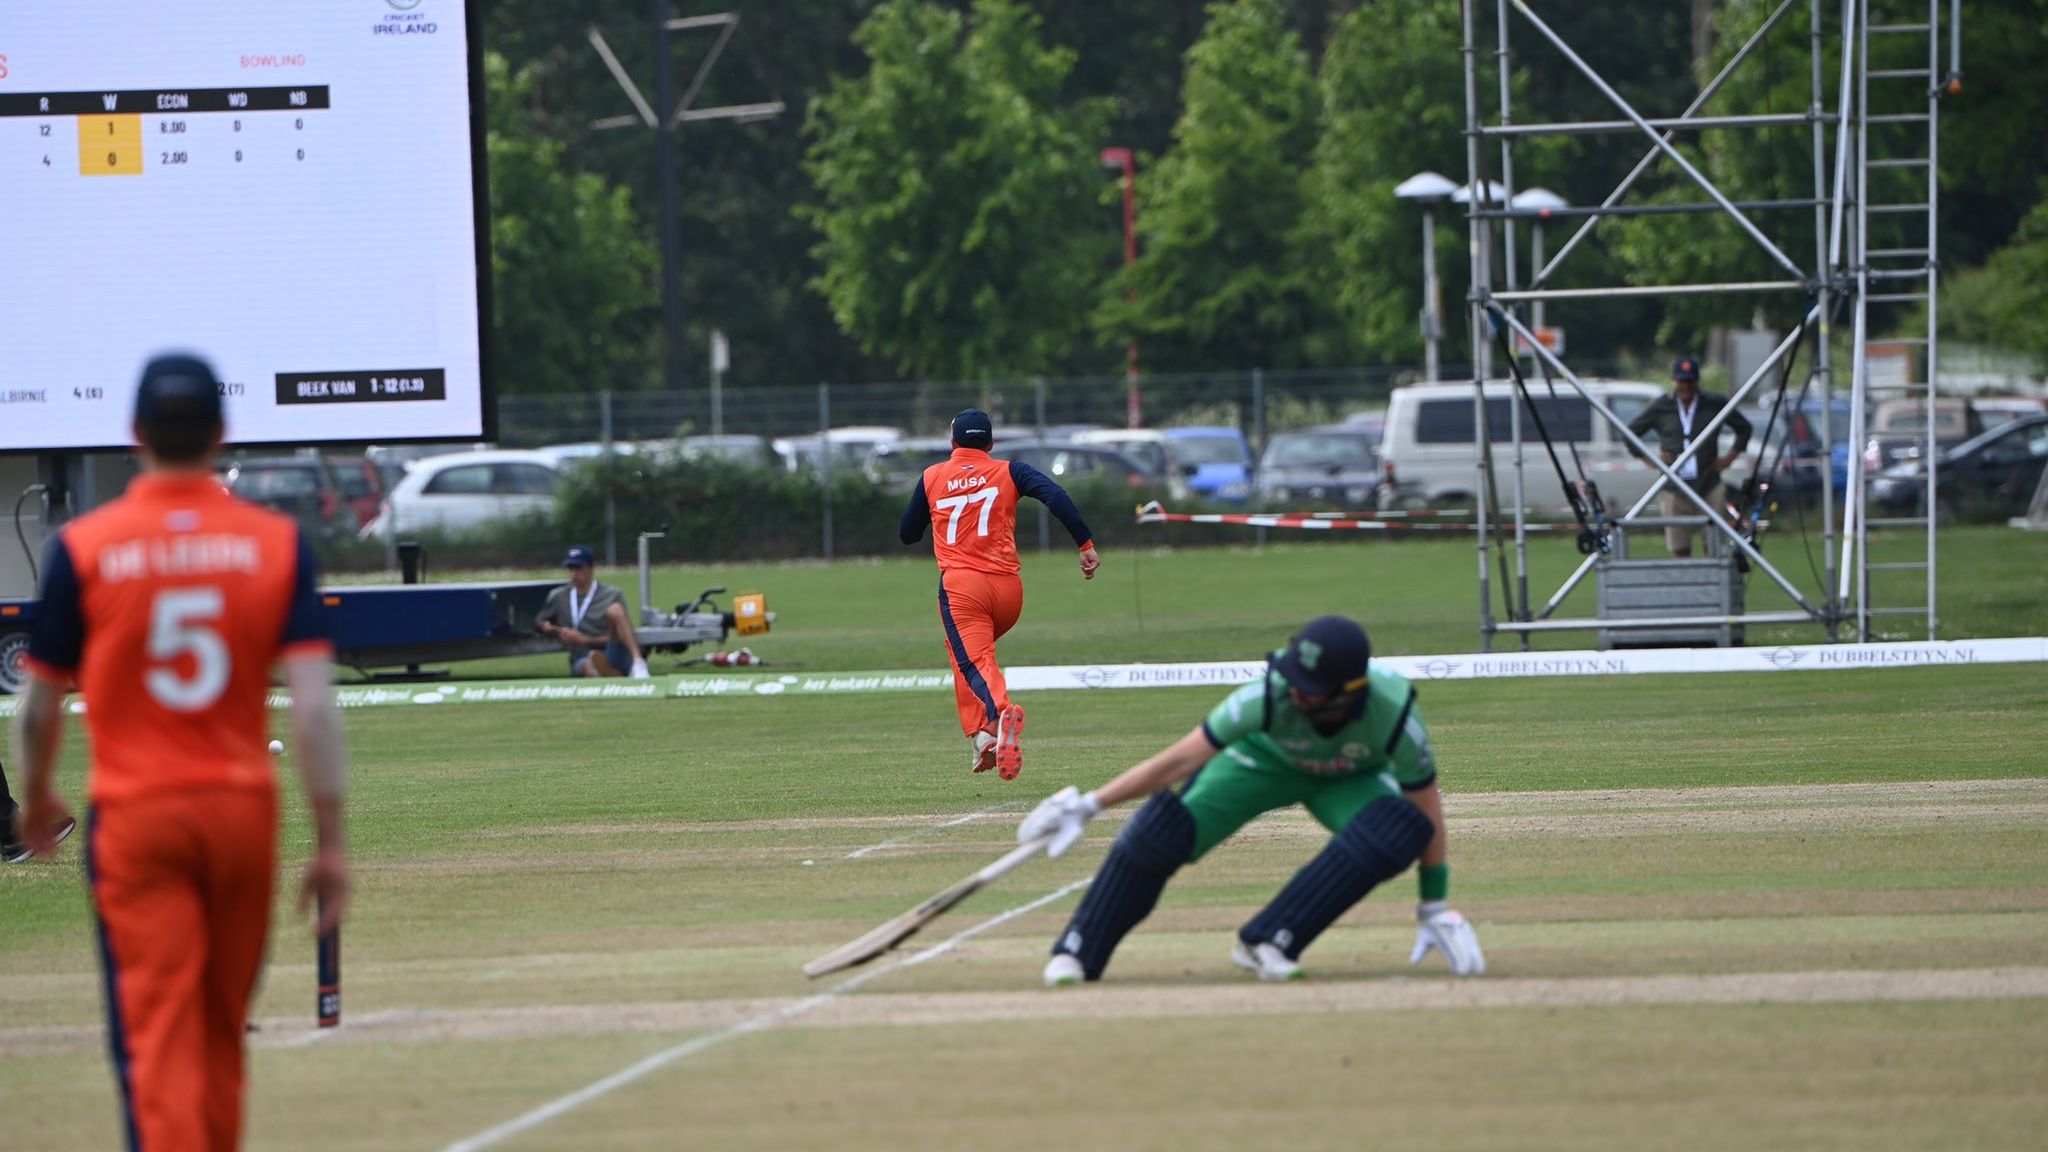 Ireland level series against Netherlands with 8-wicket win in second ODI